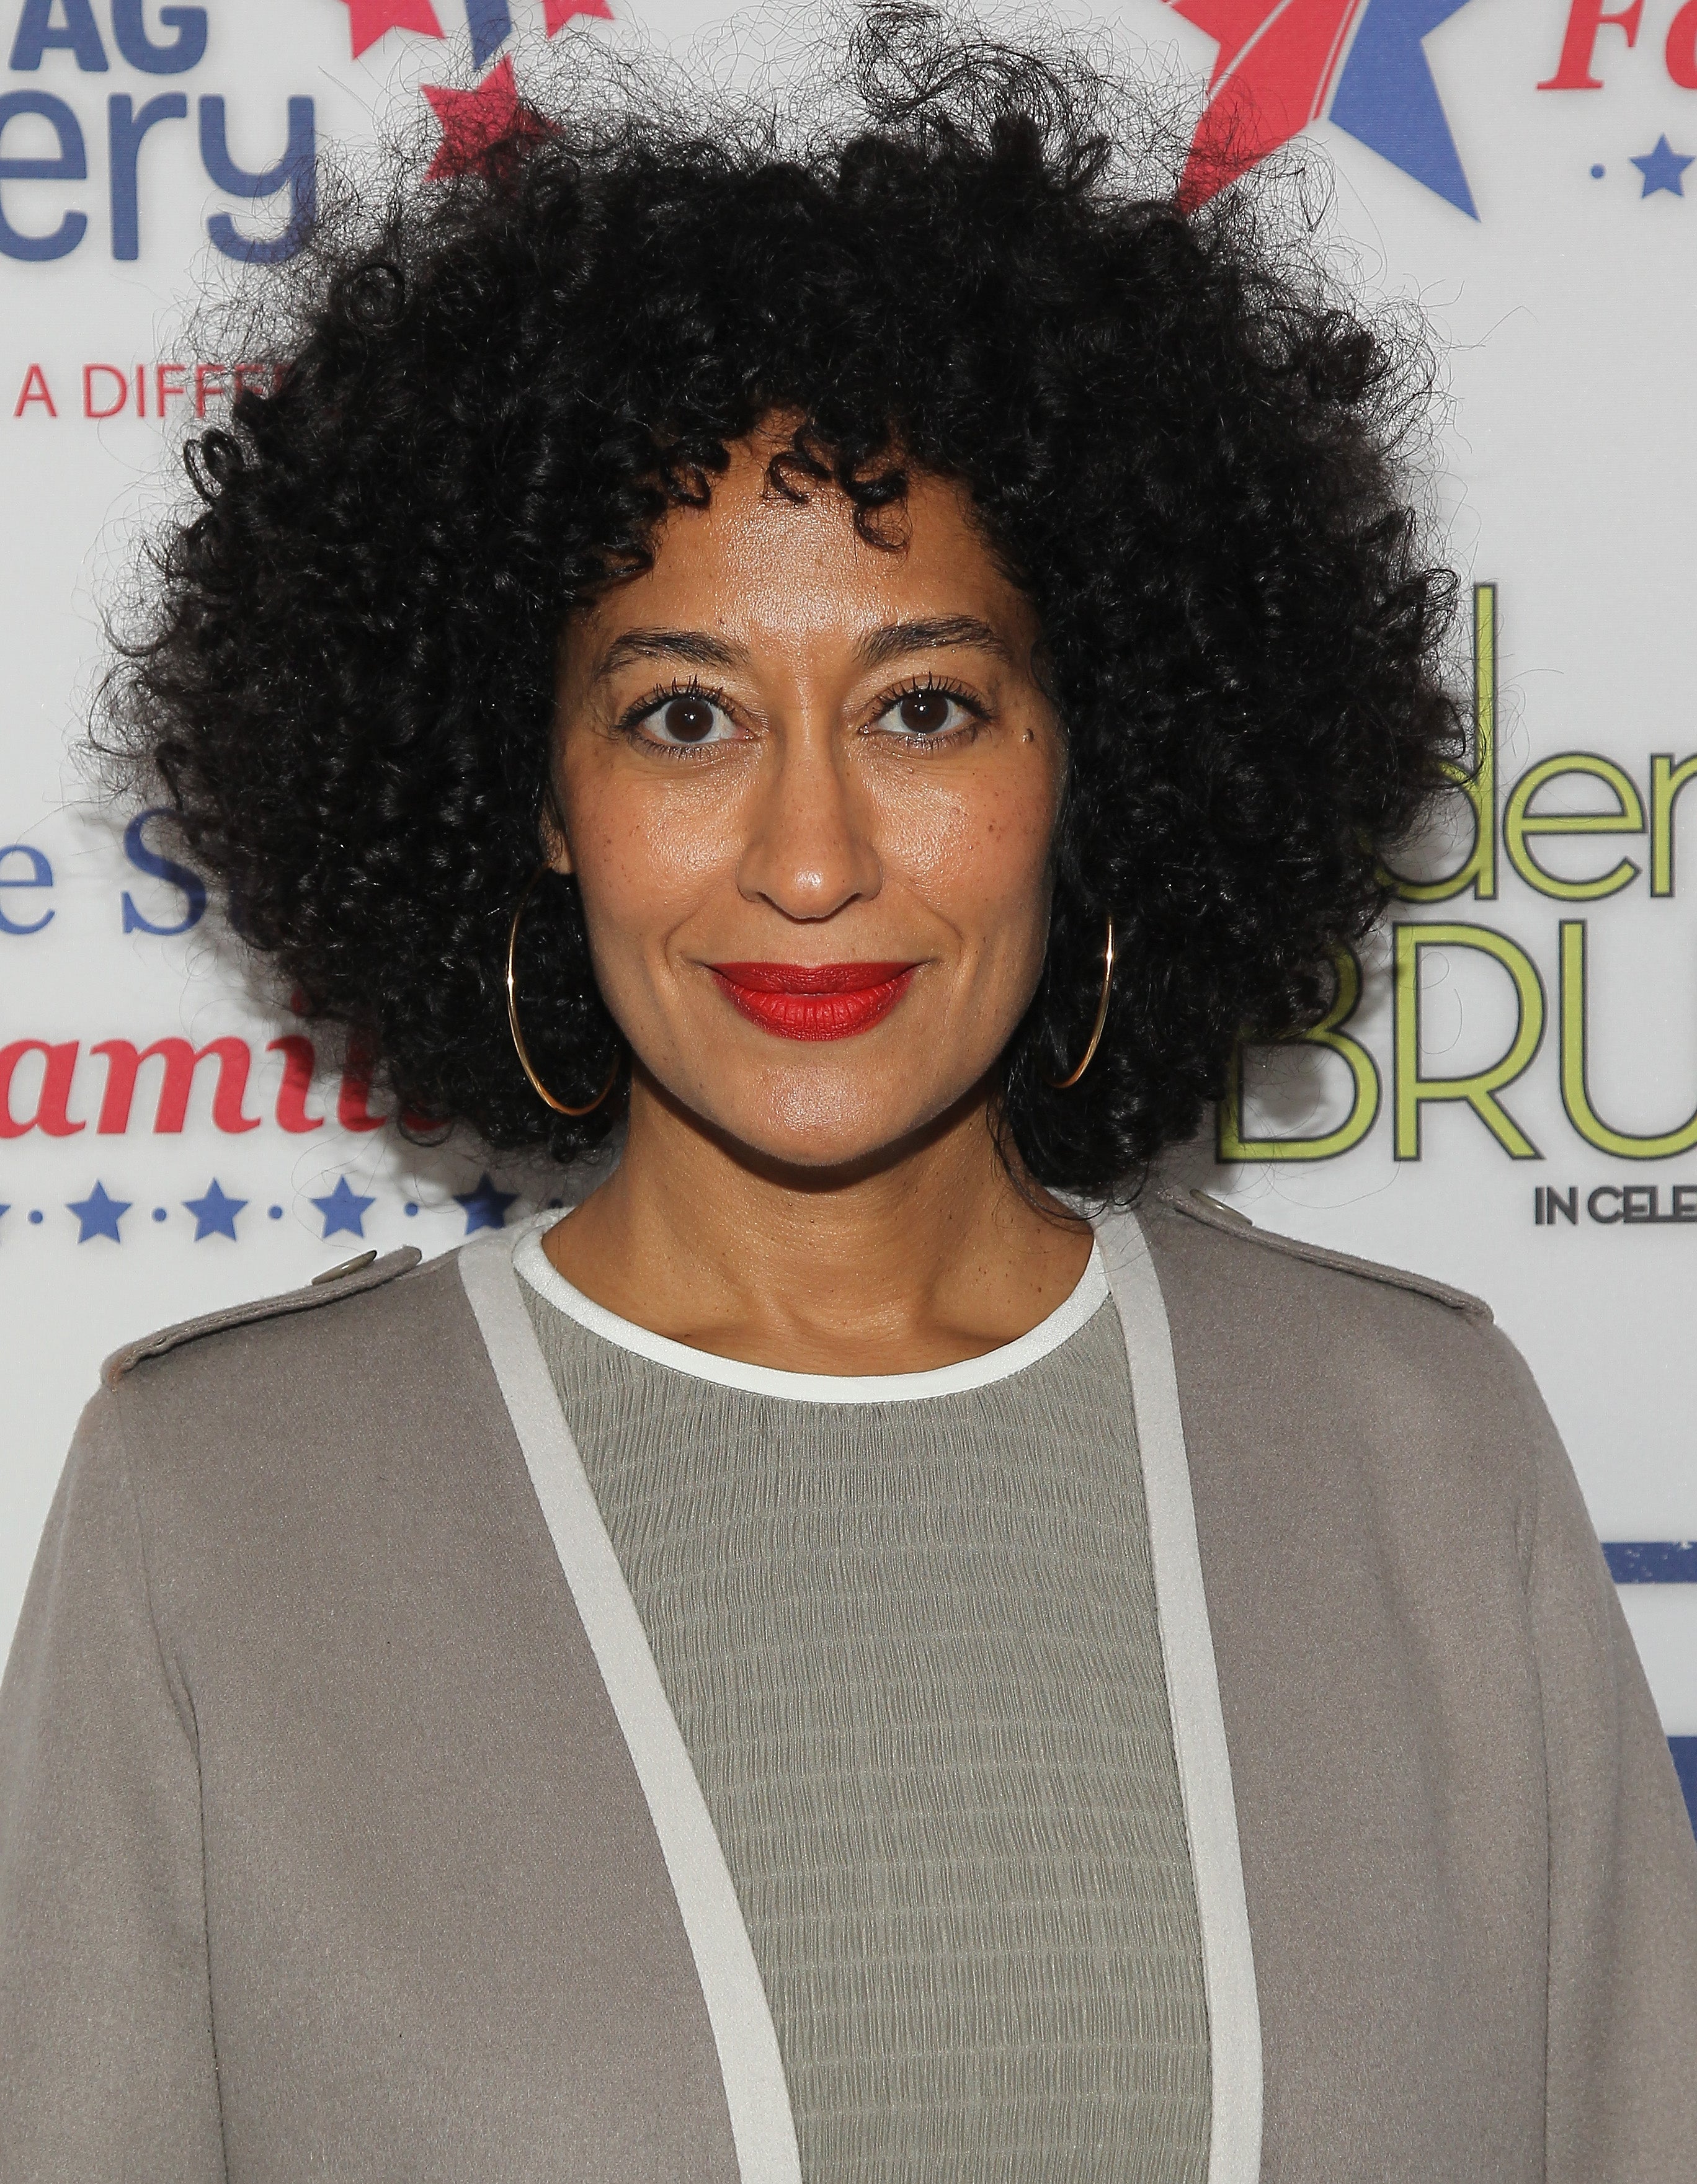 A Tribute To Tracee Ellis Ross' Biggest and Boldest Hair Moments
